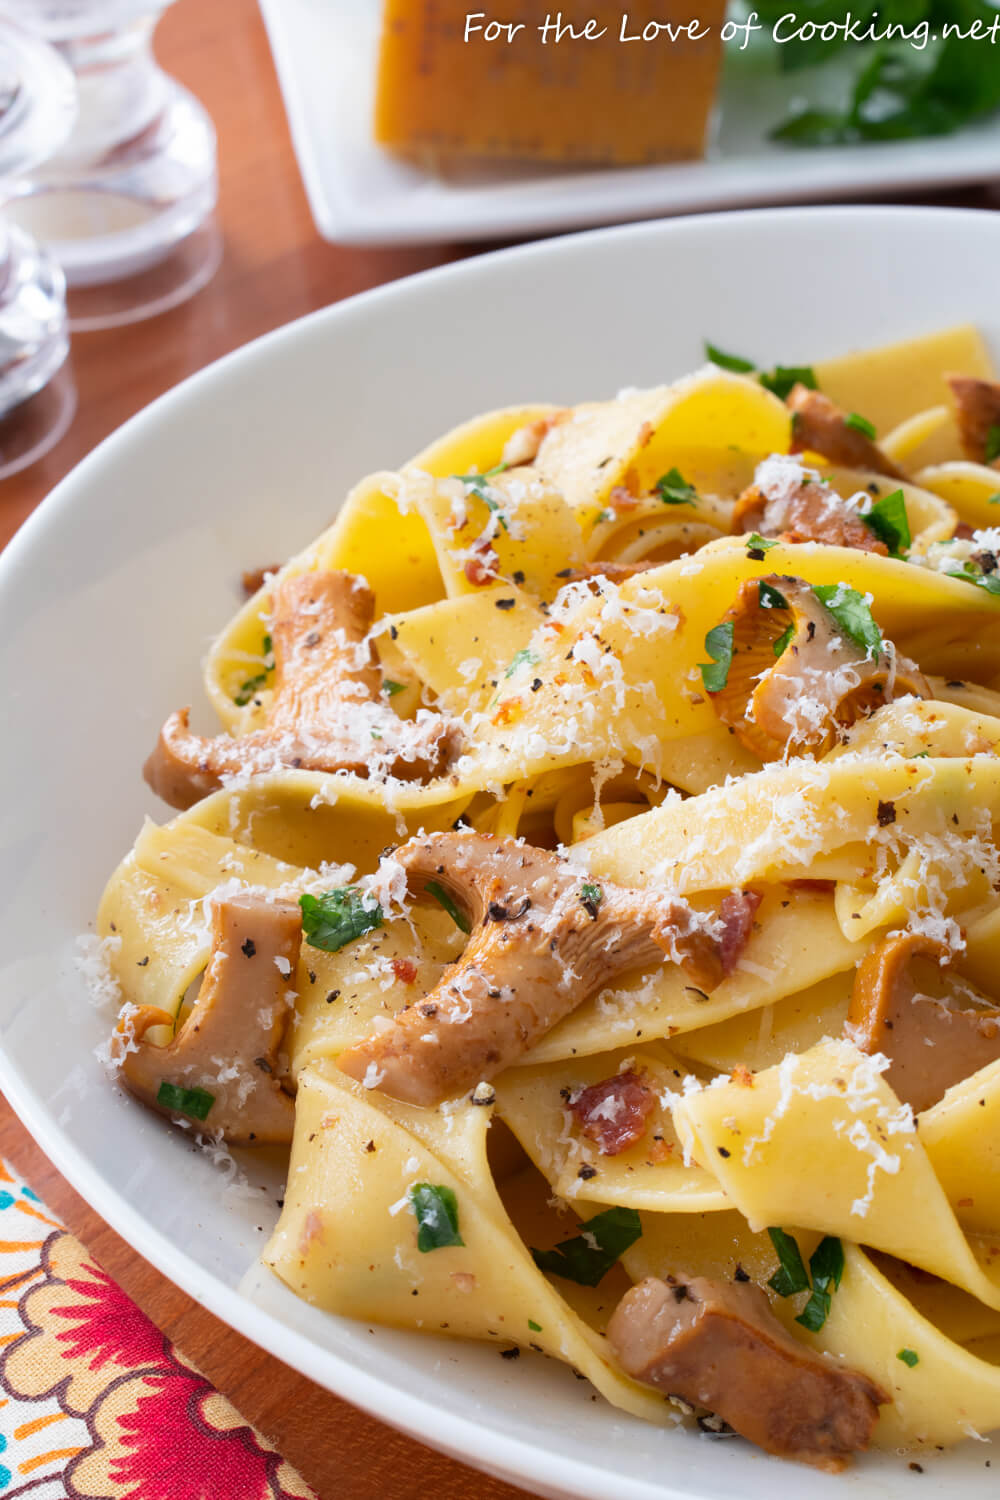 Pappardelle with Chanterelles in a Garlic Butter Wine Sauce